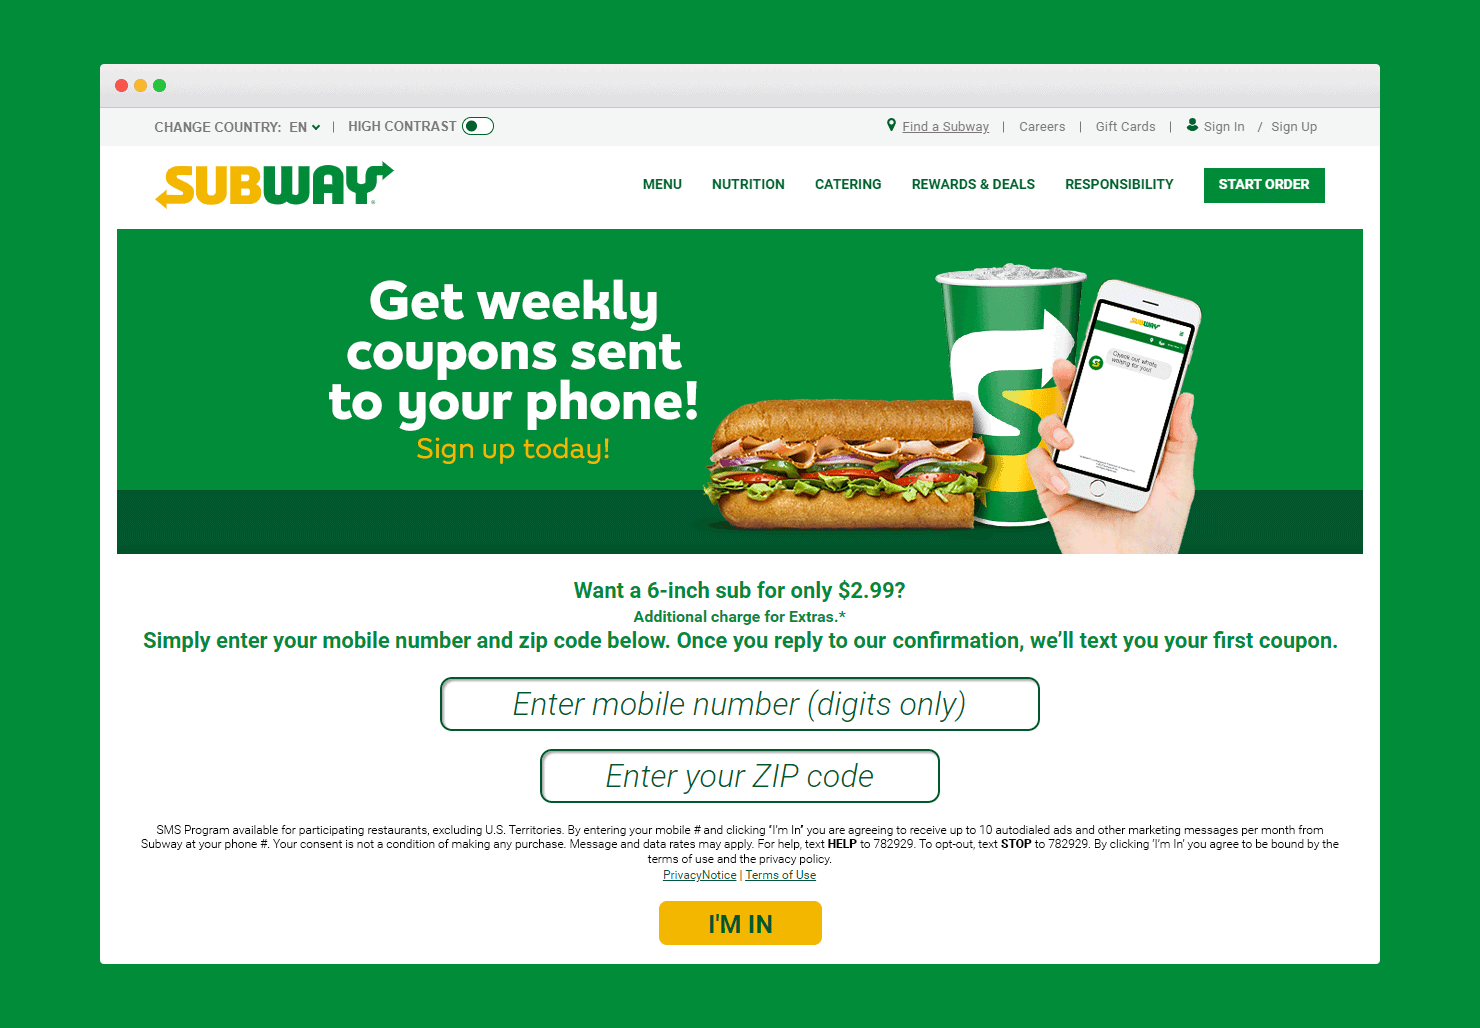 Restaurant SMS Marketing Example from Subway